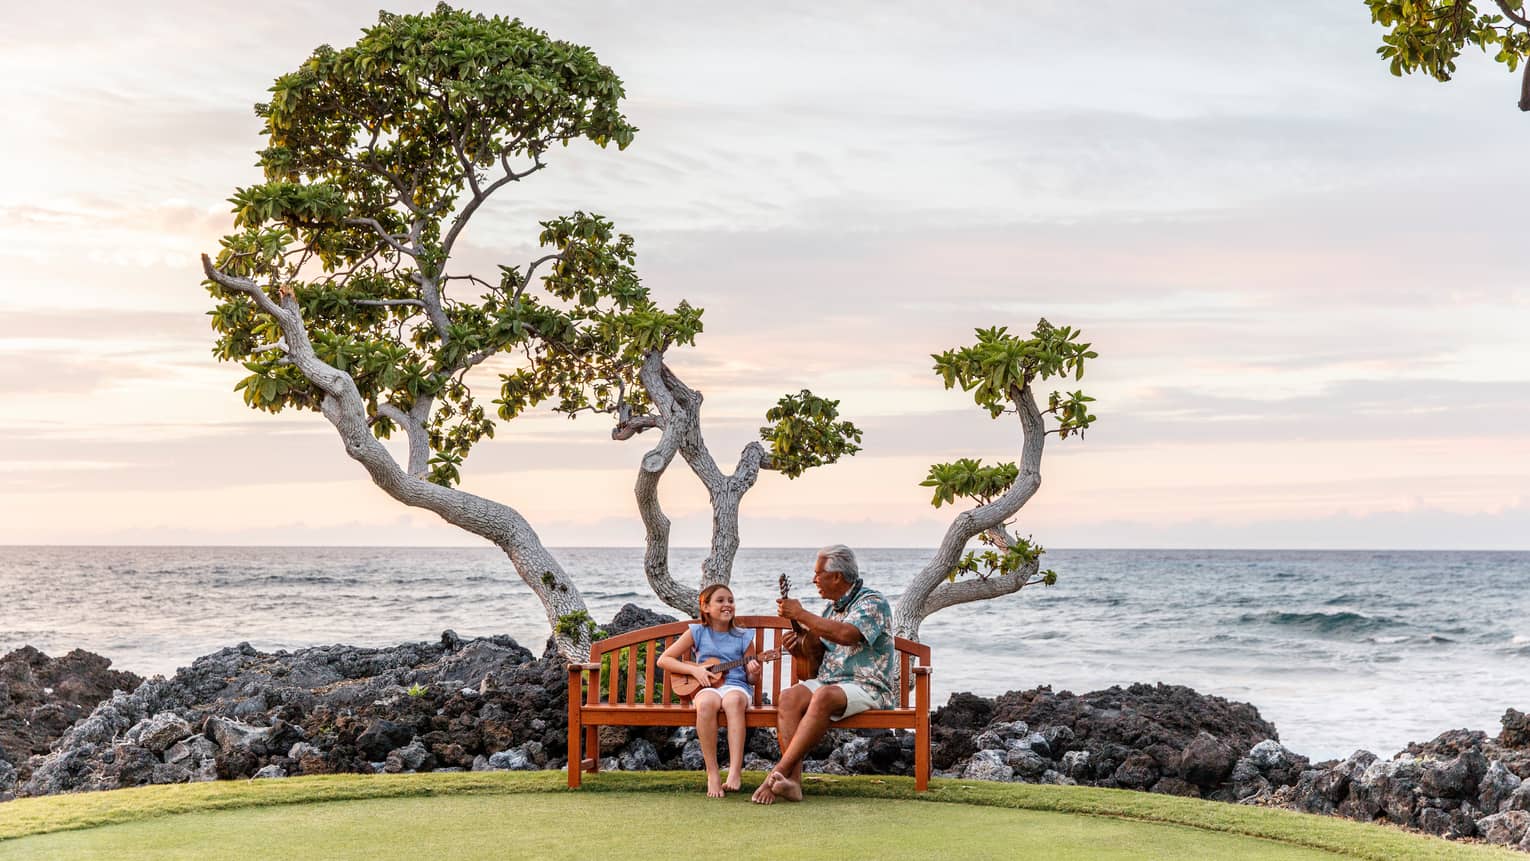 This image depicts a man and a child both playing the ukulele on a bench in front of a tree and the ocean, and is connected to ESG and sustainability